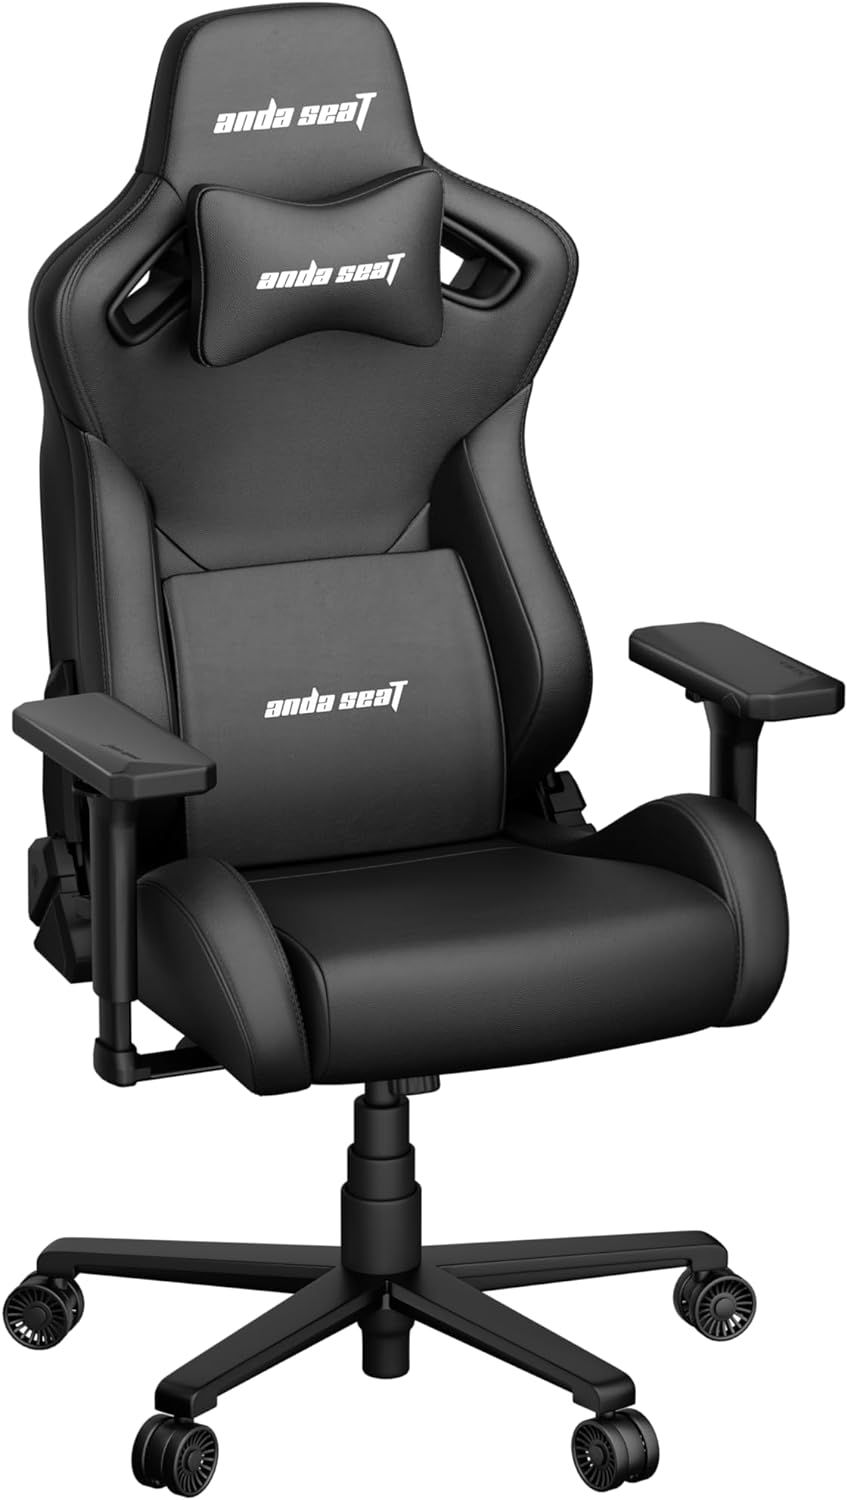 Anda Seat Kaiser Frontier Black Leather Gaming Chair XL